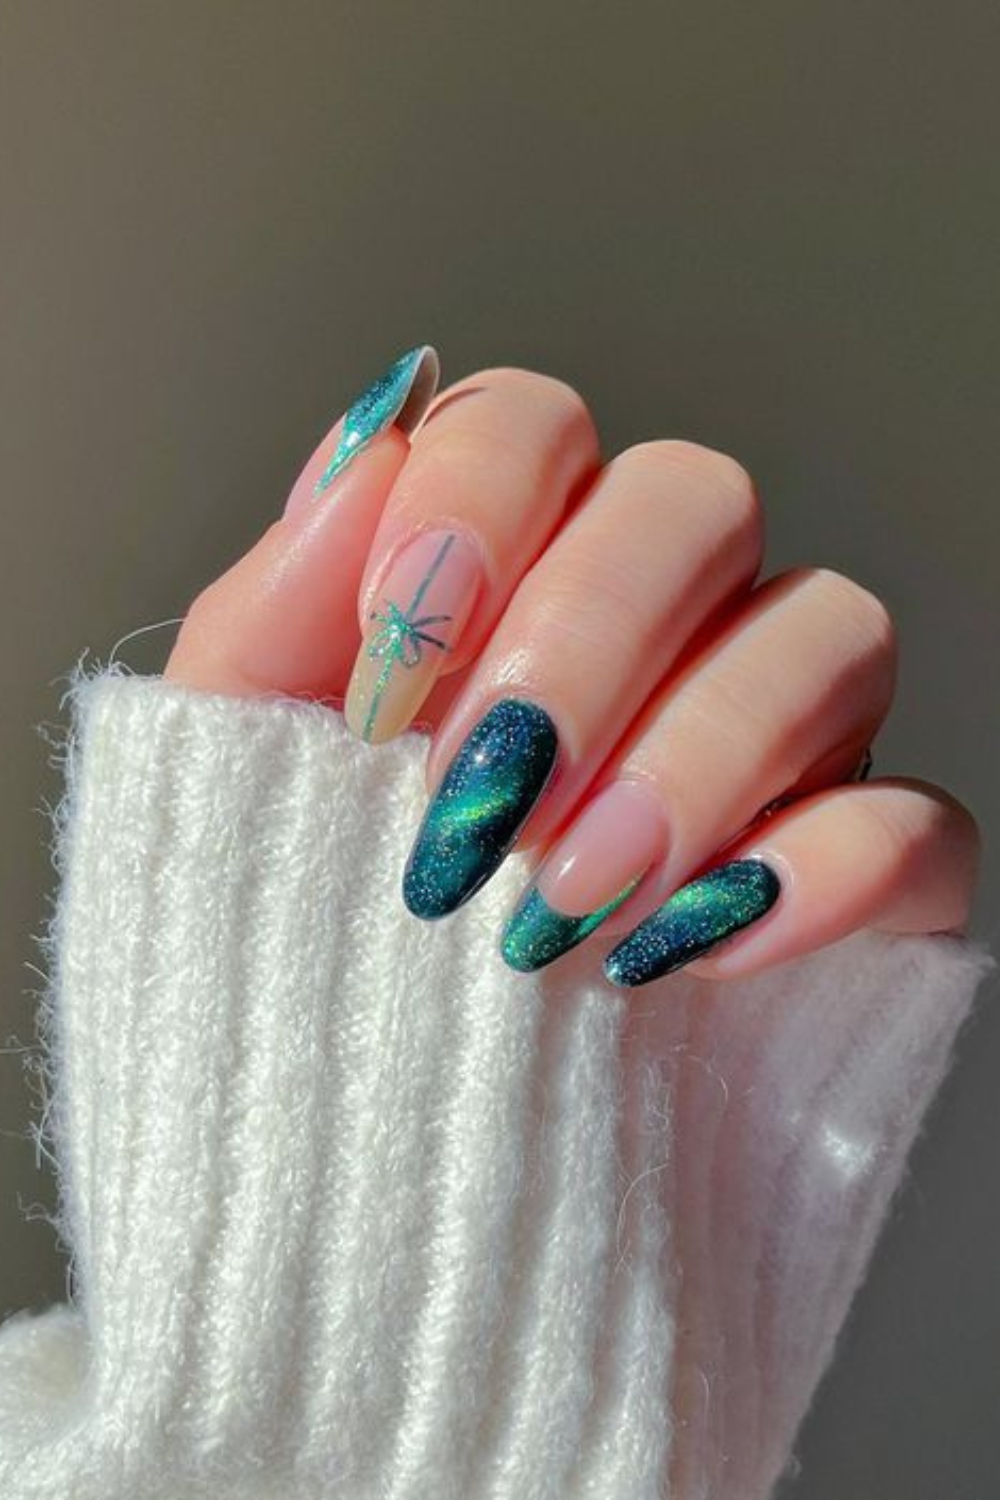 Copy These Colorful Nail Designs to Brighten Your Fall Days